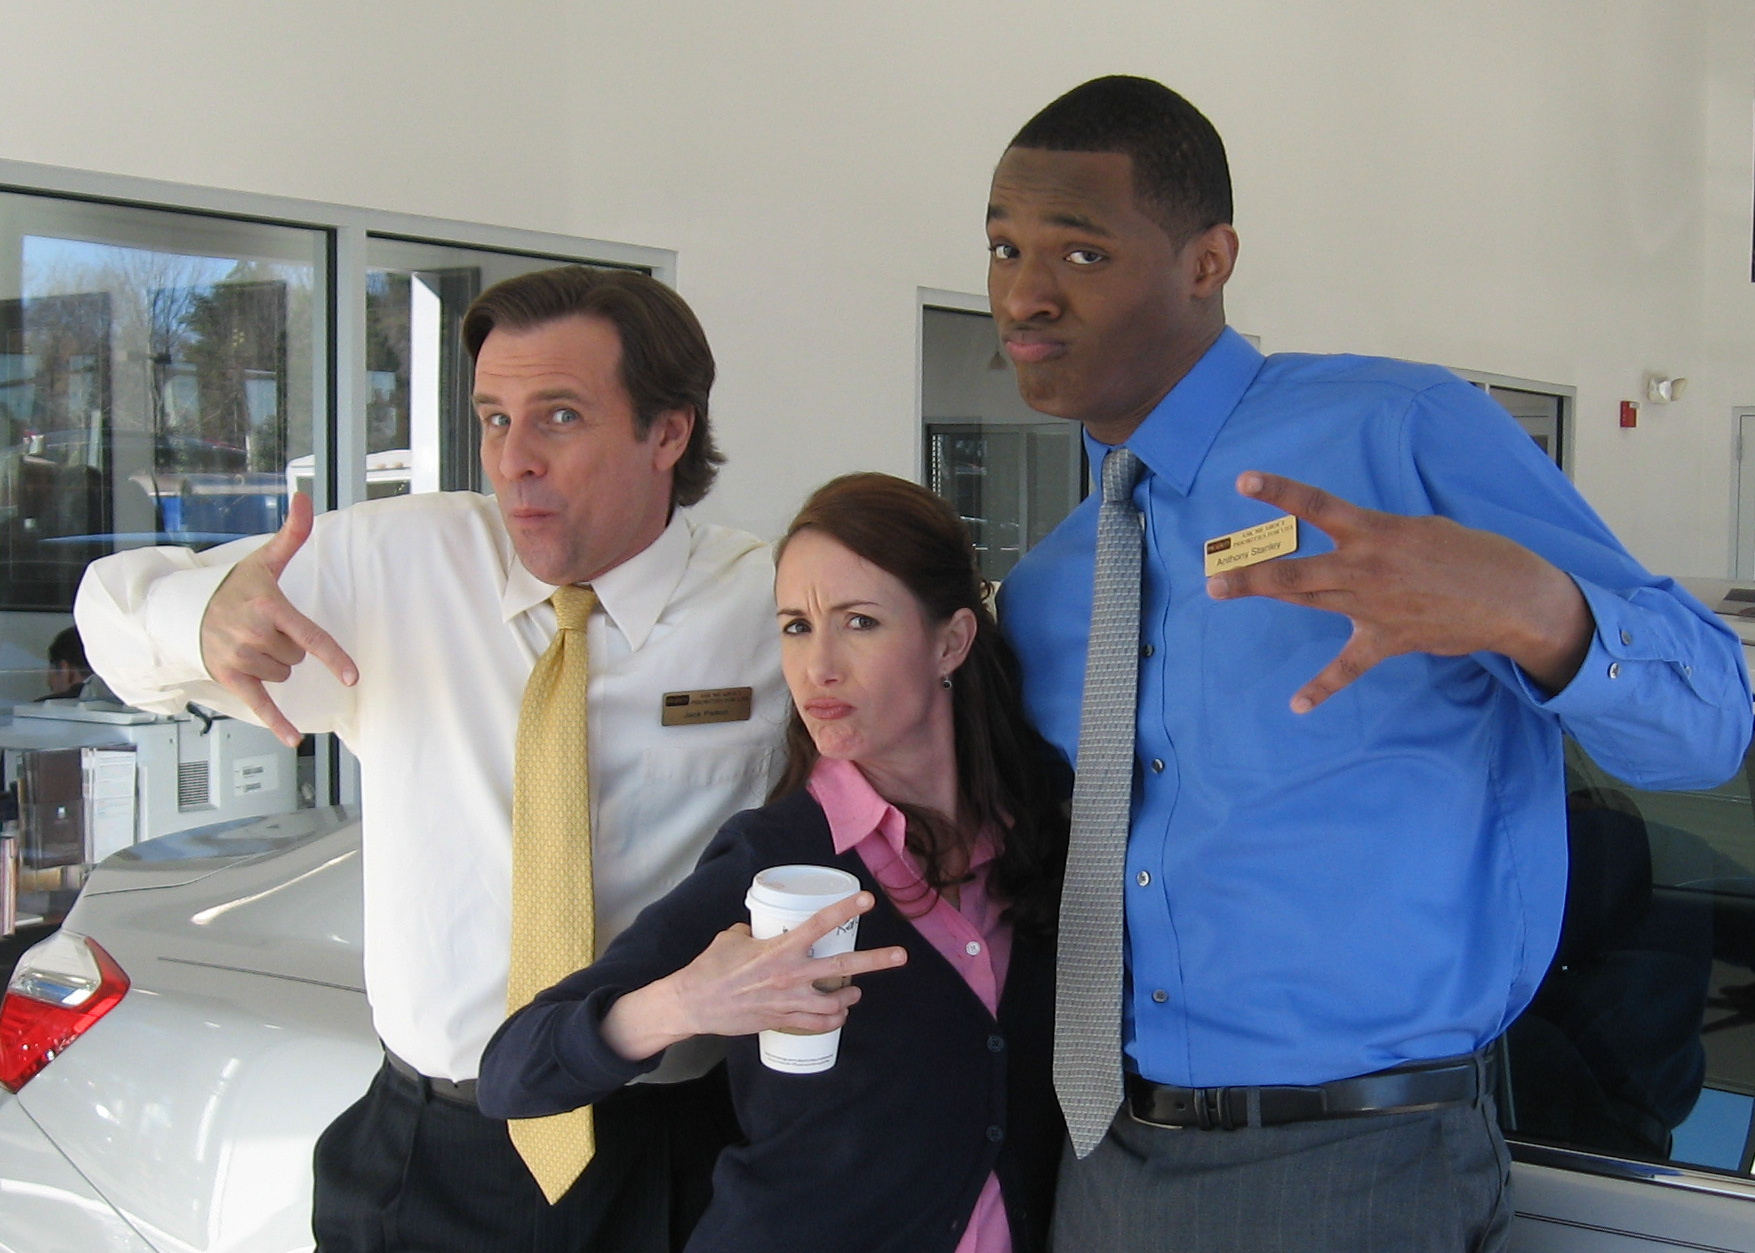 Scott, Kelley Davis and Wes Dew are chilling on the set of a Priority Super Bowl commercial shooting in Chesapeake, VA Jan. 2013